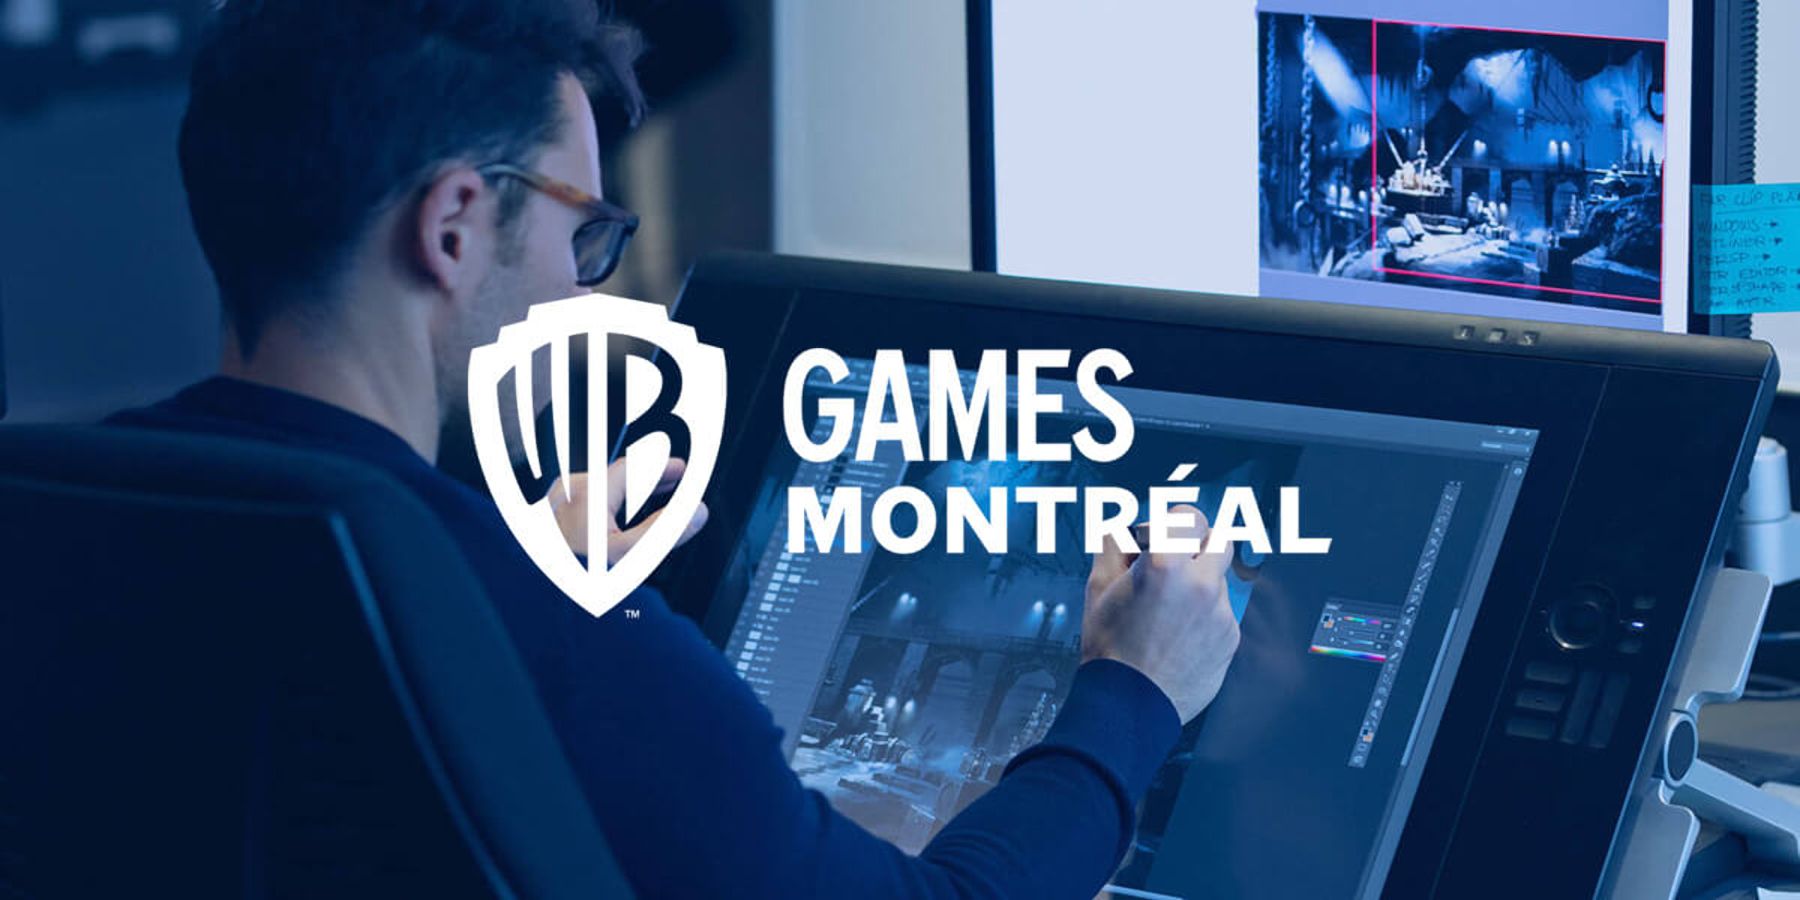 wb games montreal official studio banner